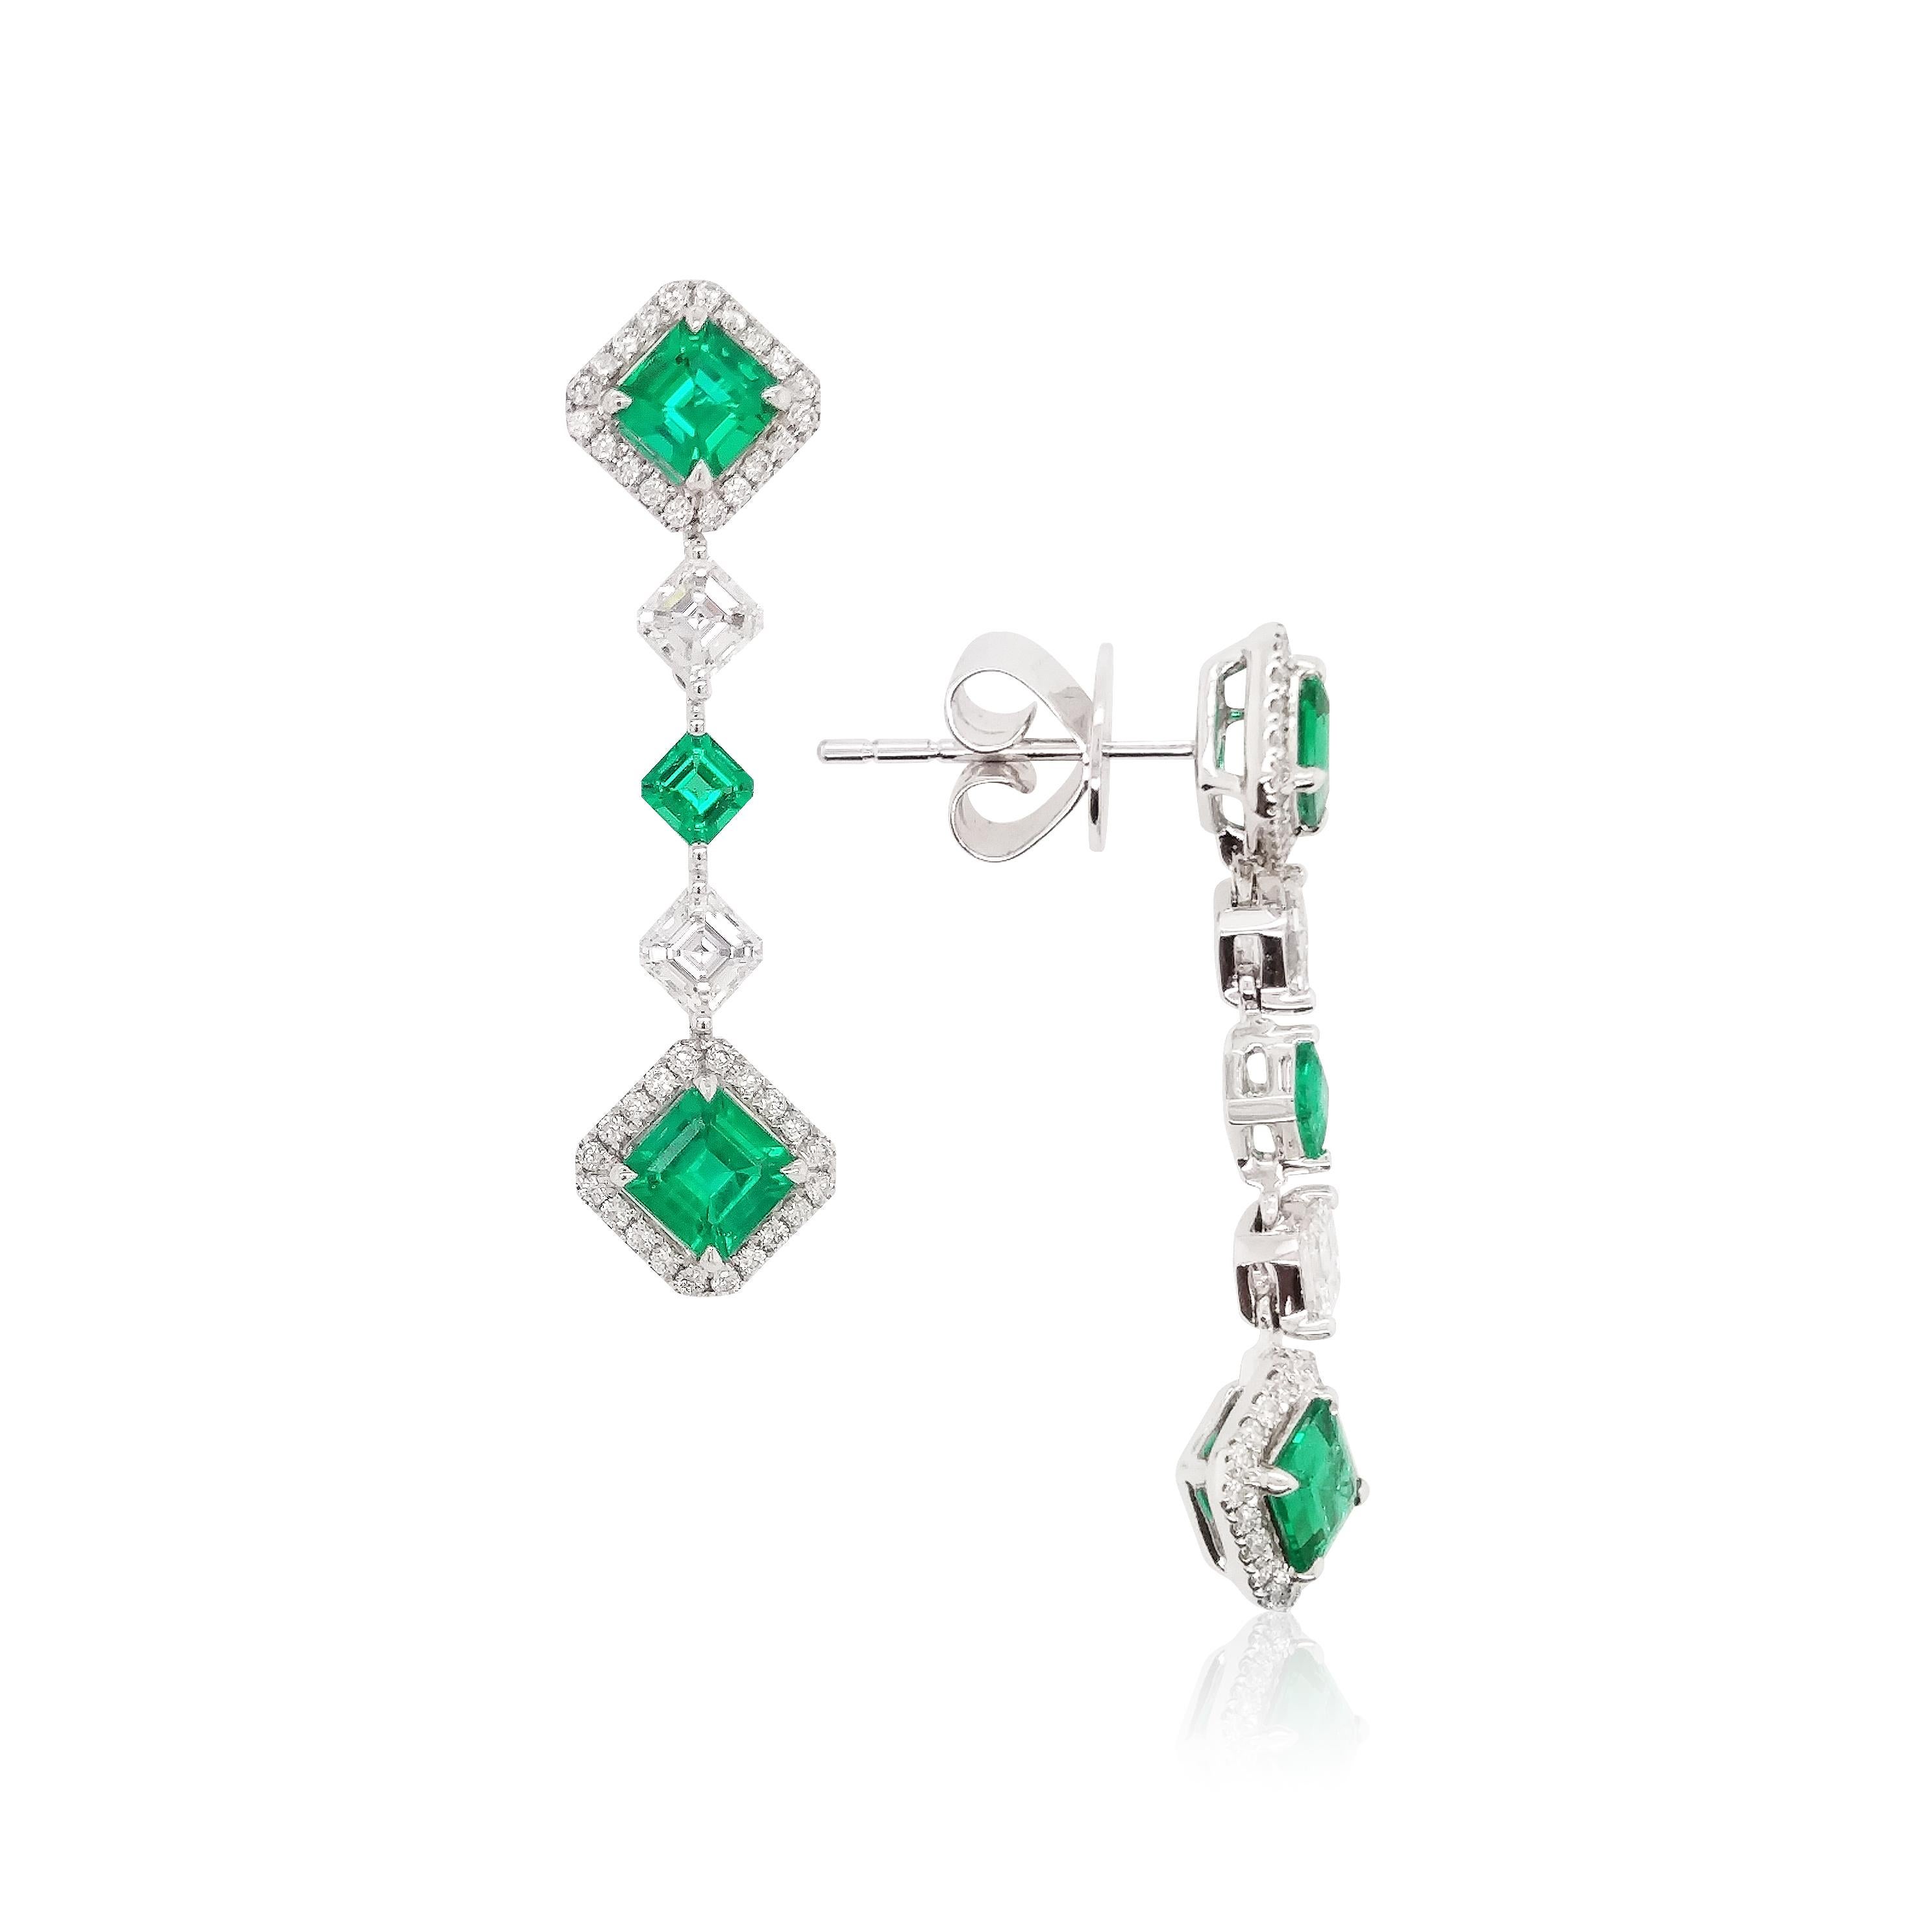 Contemporary Certified Colombian Emerald and White Diamond 18K White Gold Drop Earrings